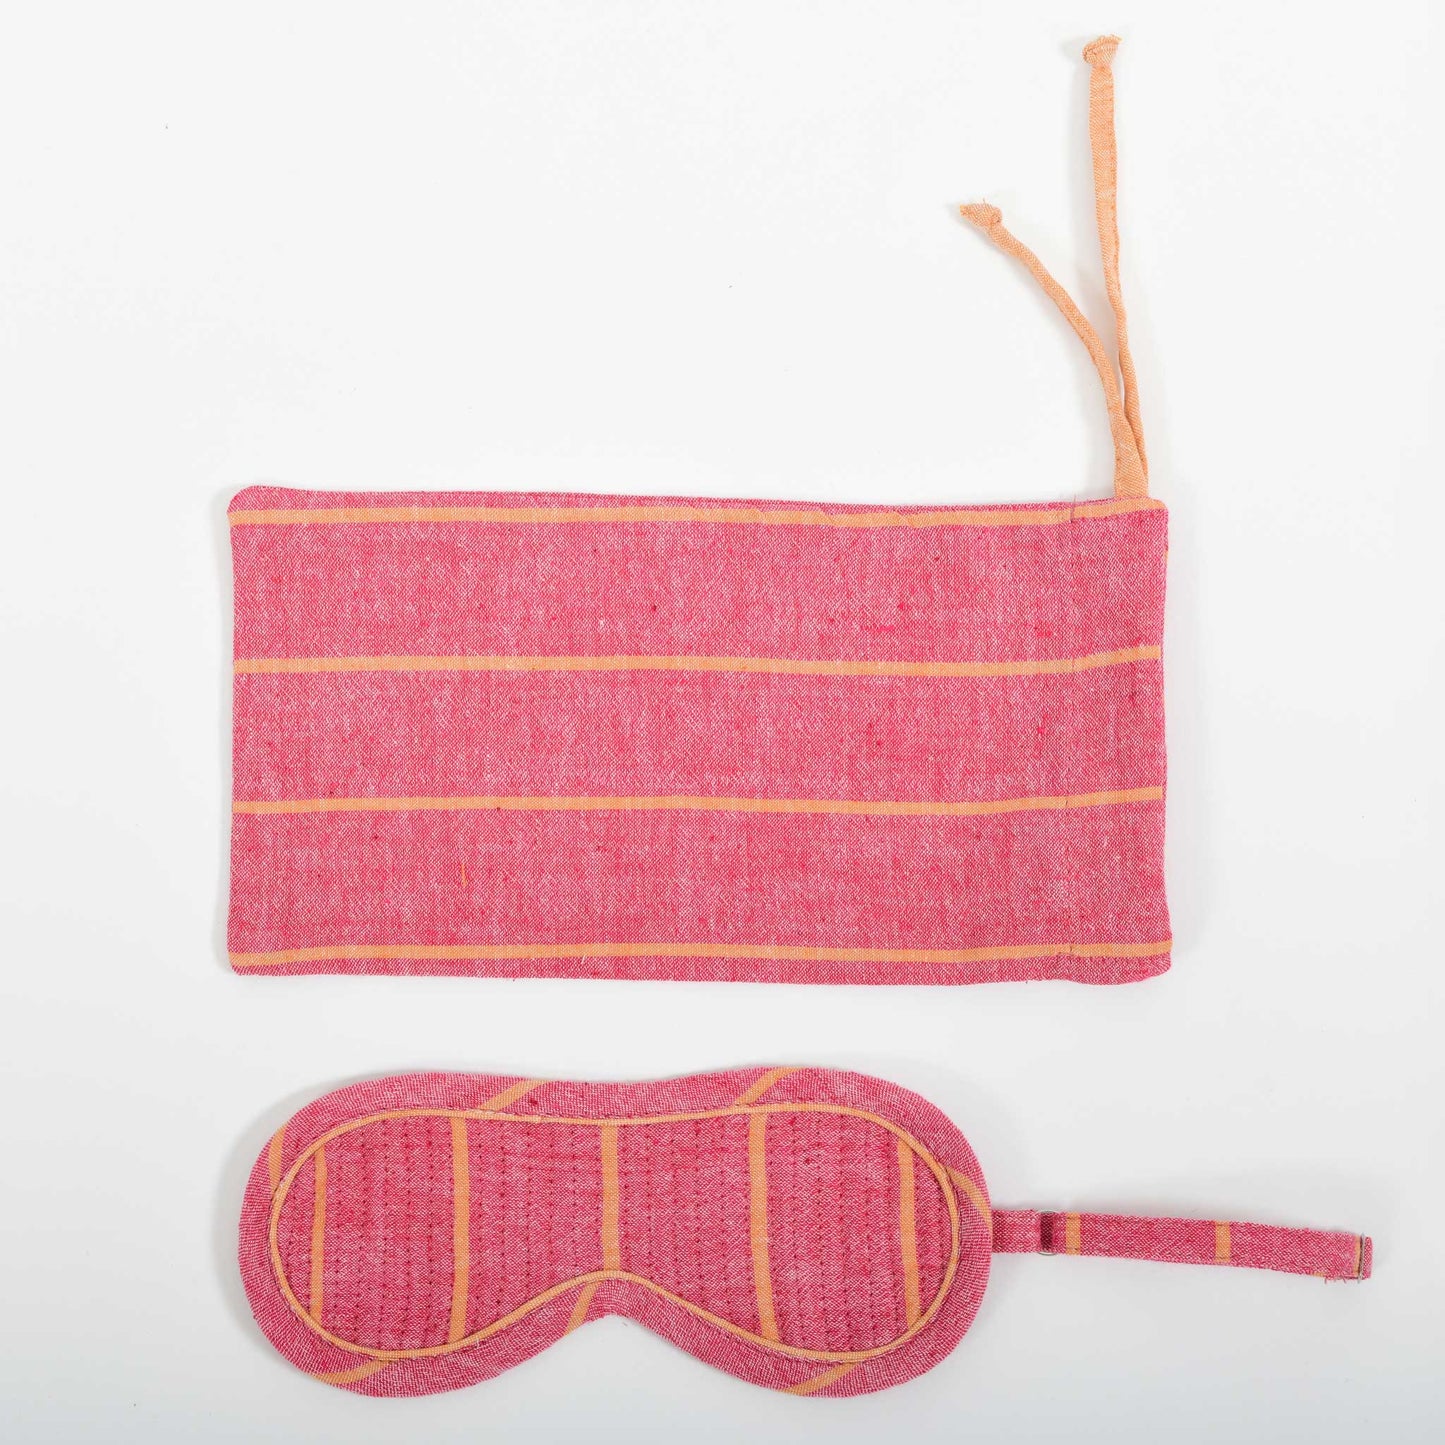 A close-up image from the top of the red with orange stripe chambray eye mask and it's co-ordinated cover made in handspun and handwoven khadi cotton by Cotton Rack.